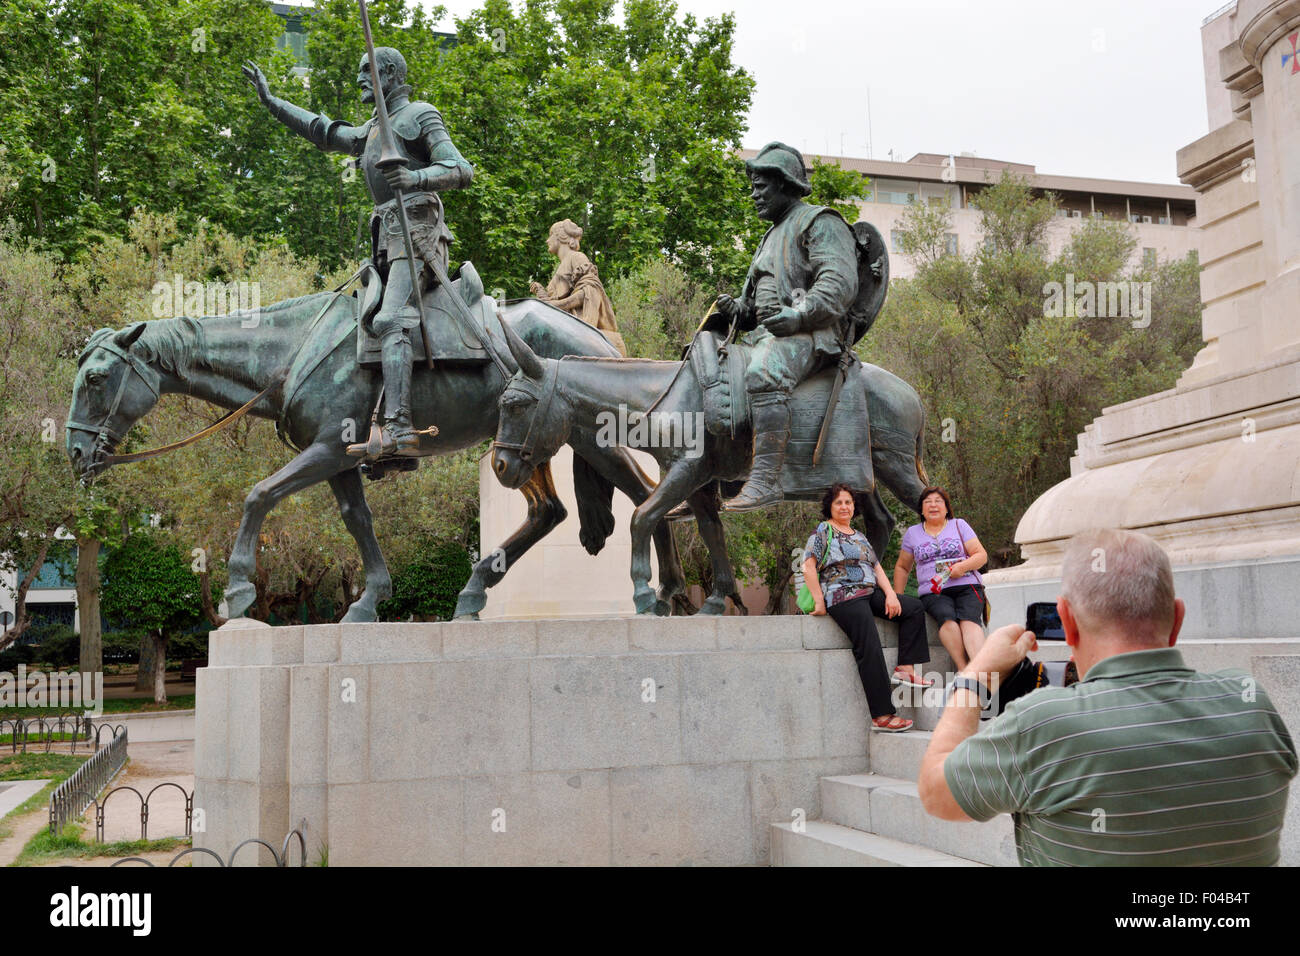 Tourists photographing statues of Don Quixote and Sancho Panza, Plaza of Spain, Madrid Statues of Don Quixote, knight errant Stock Photo